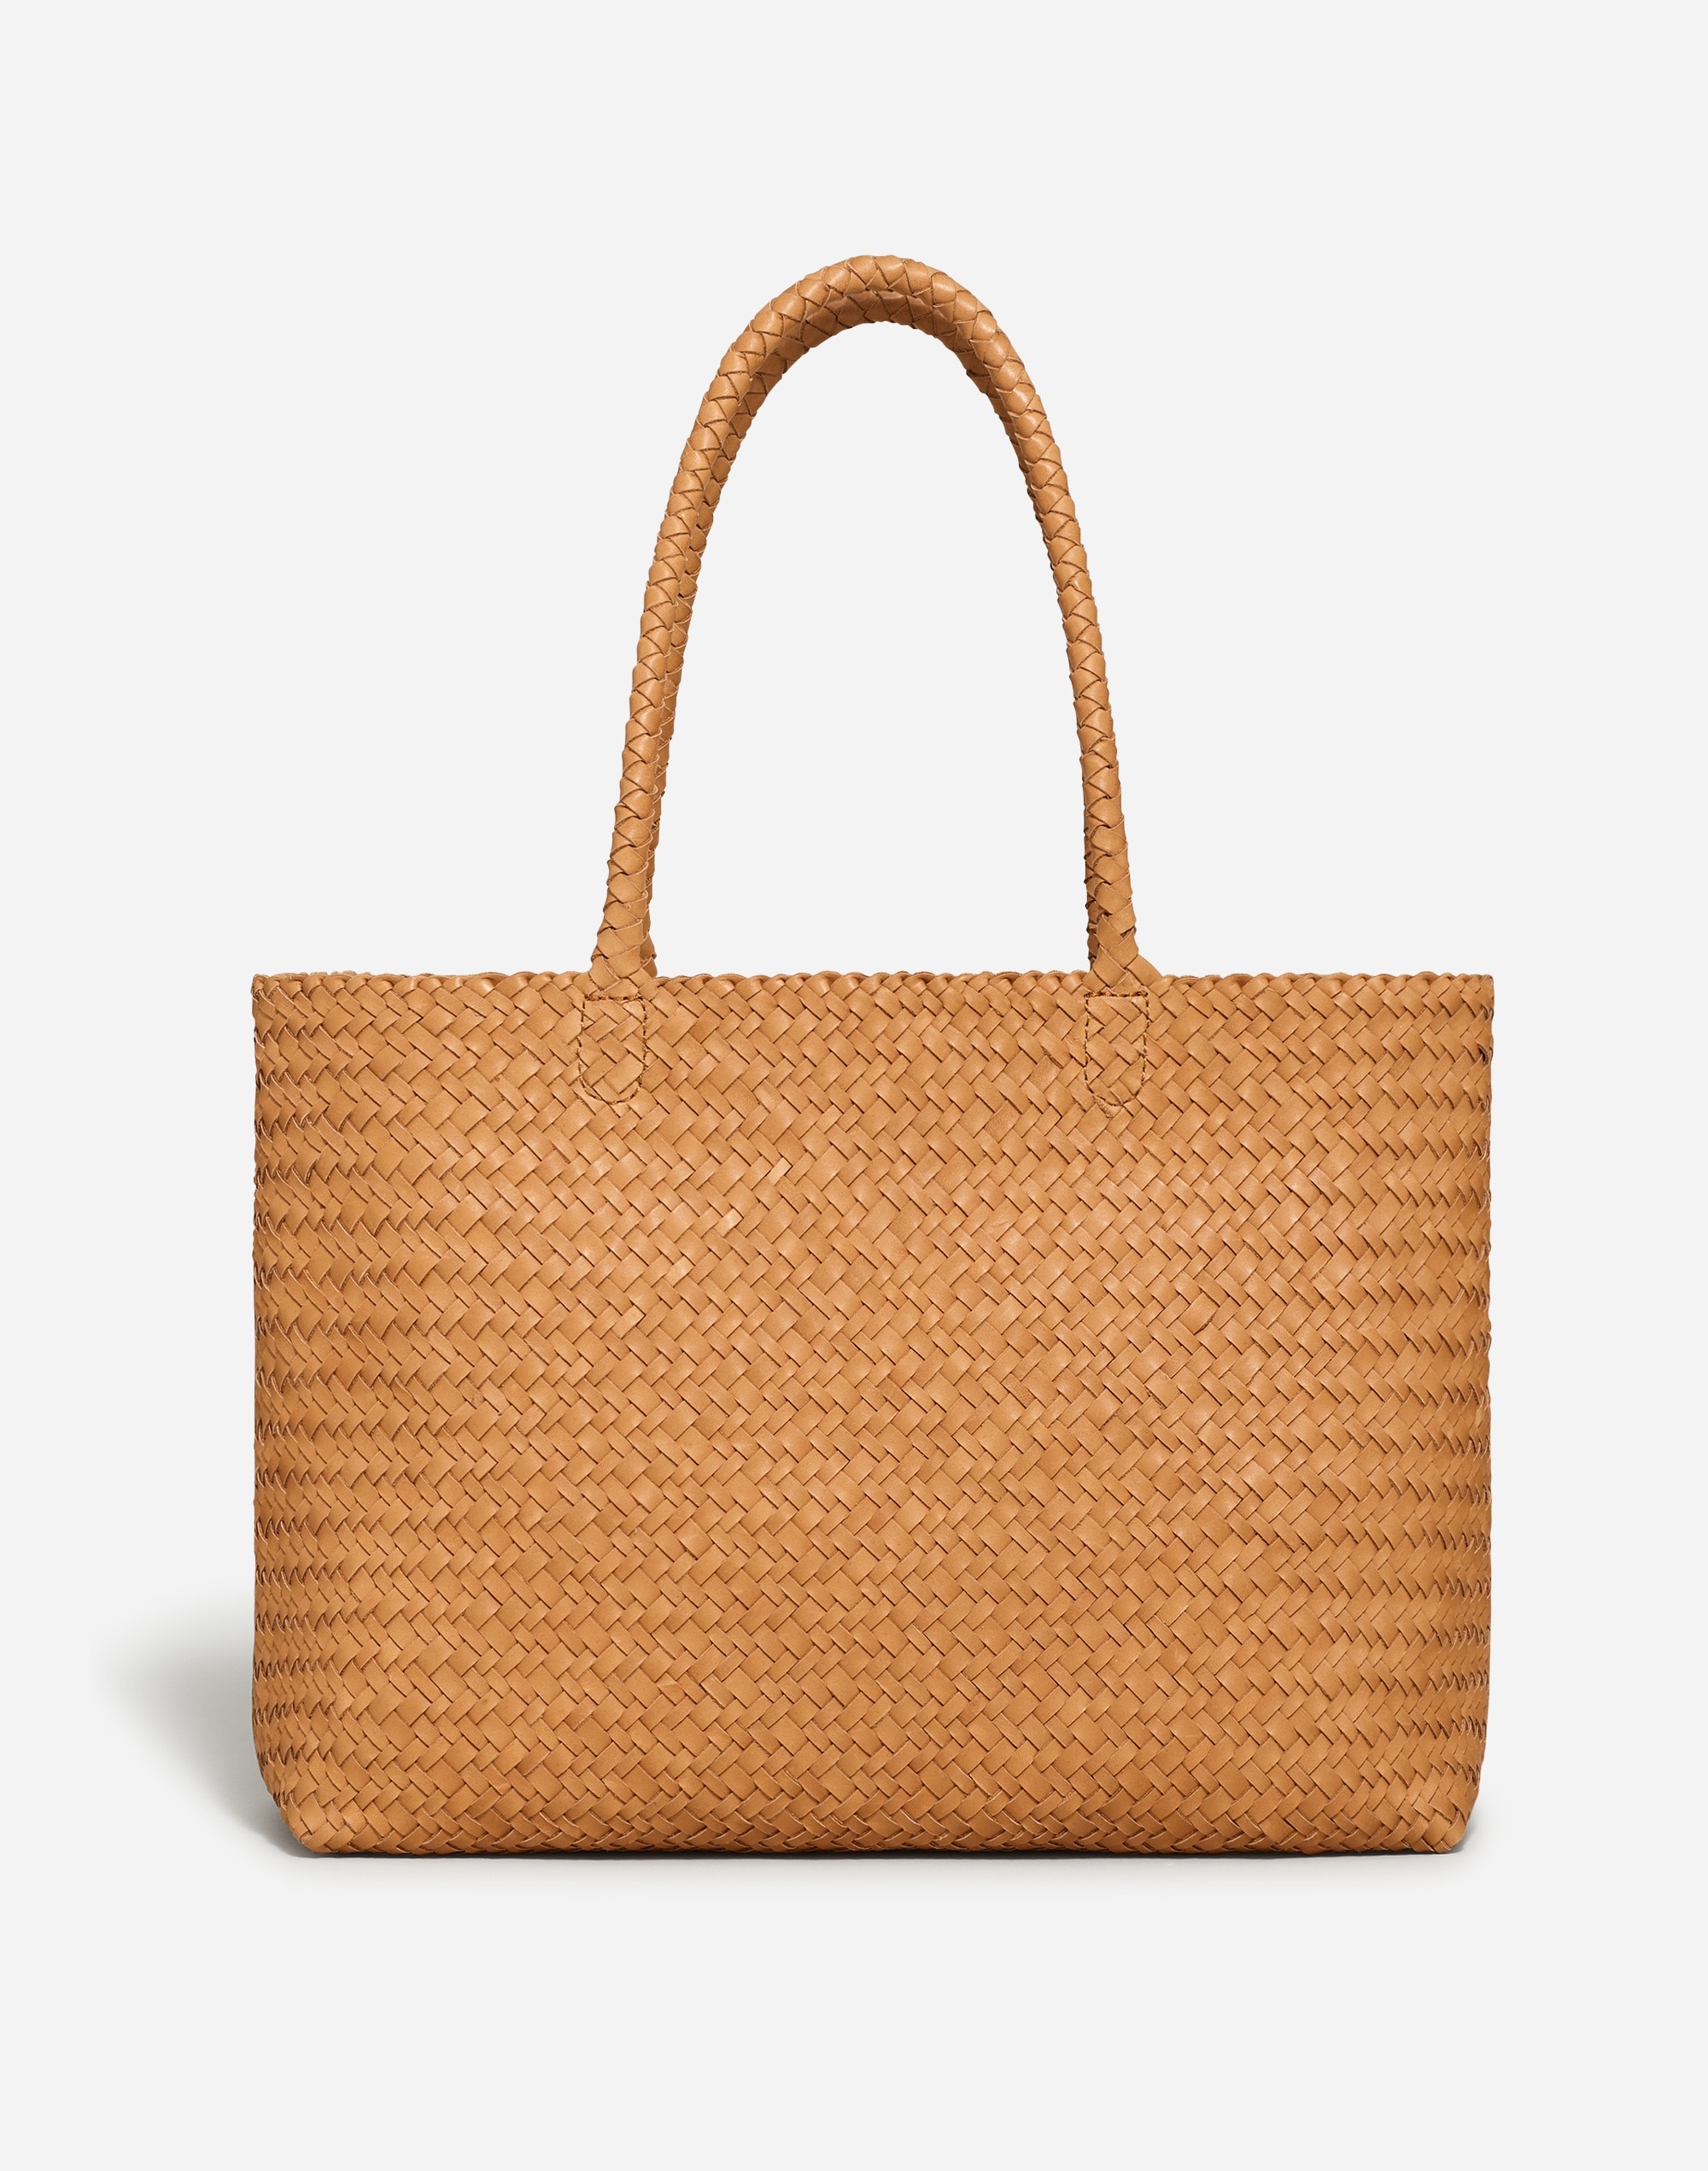 Mw The Transport Tote In Desert Camel